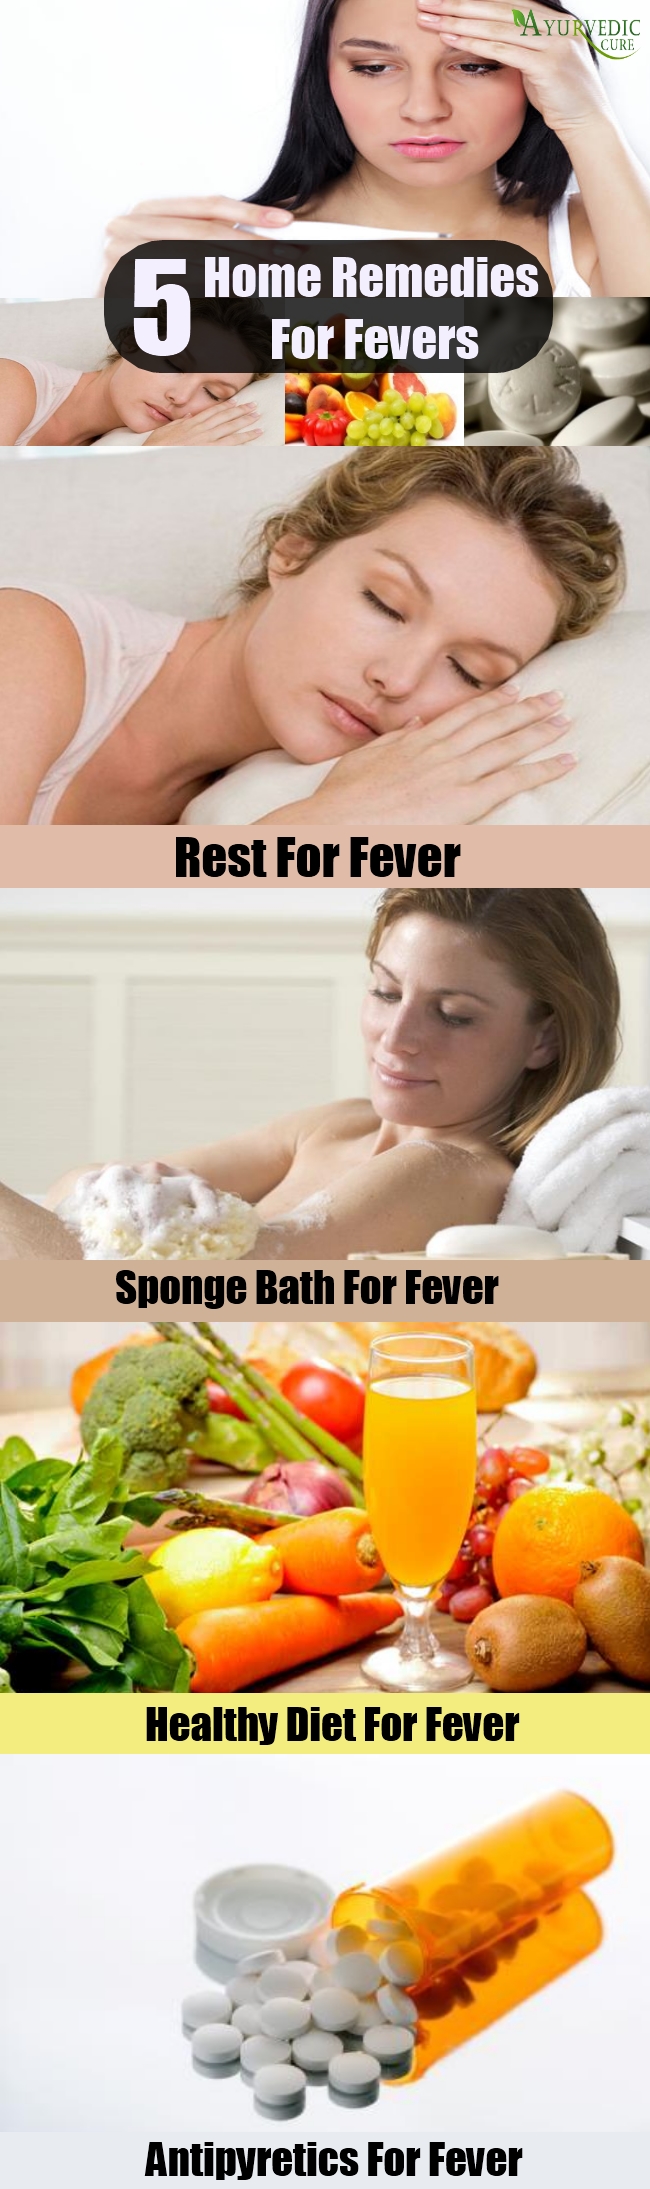 Important Home Remedies For Fevers